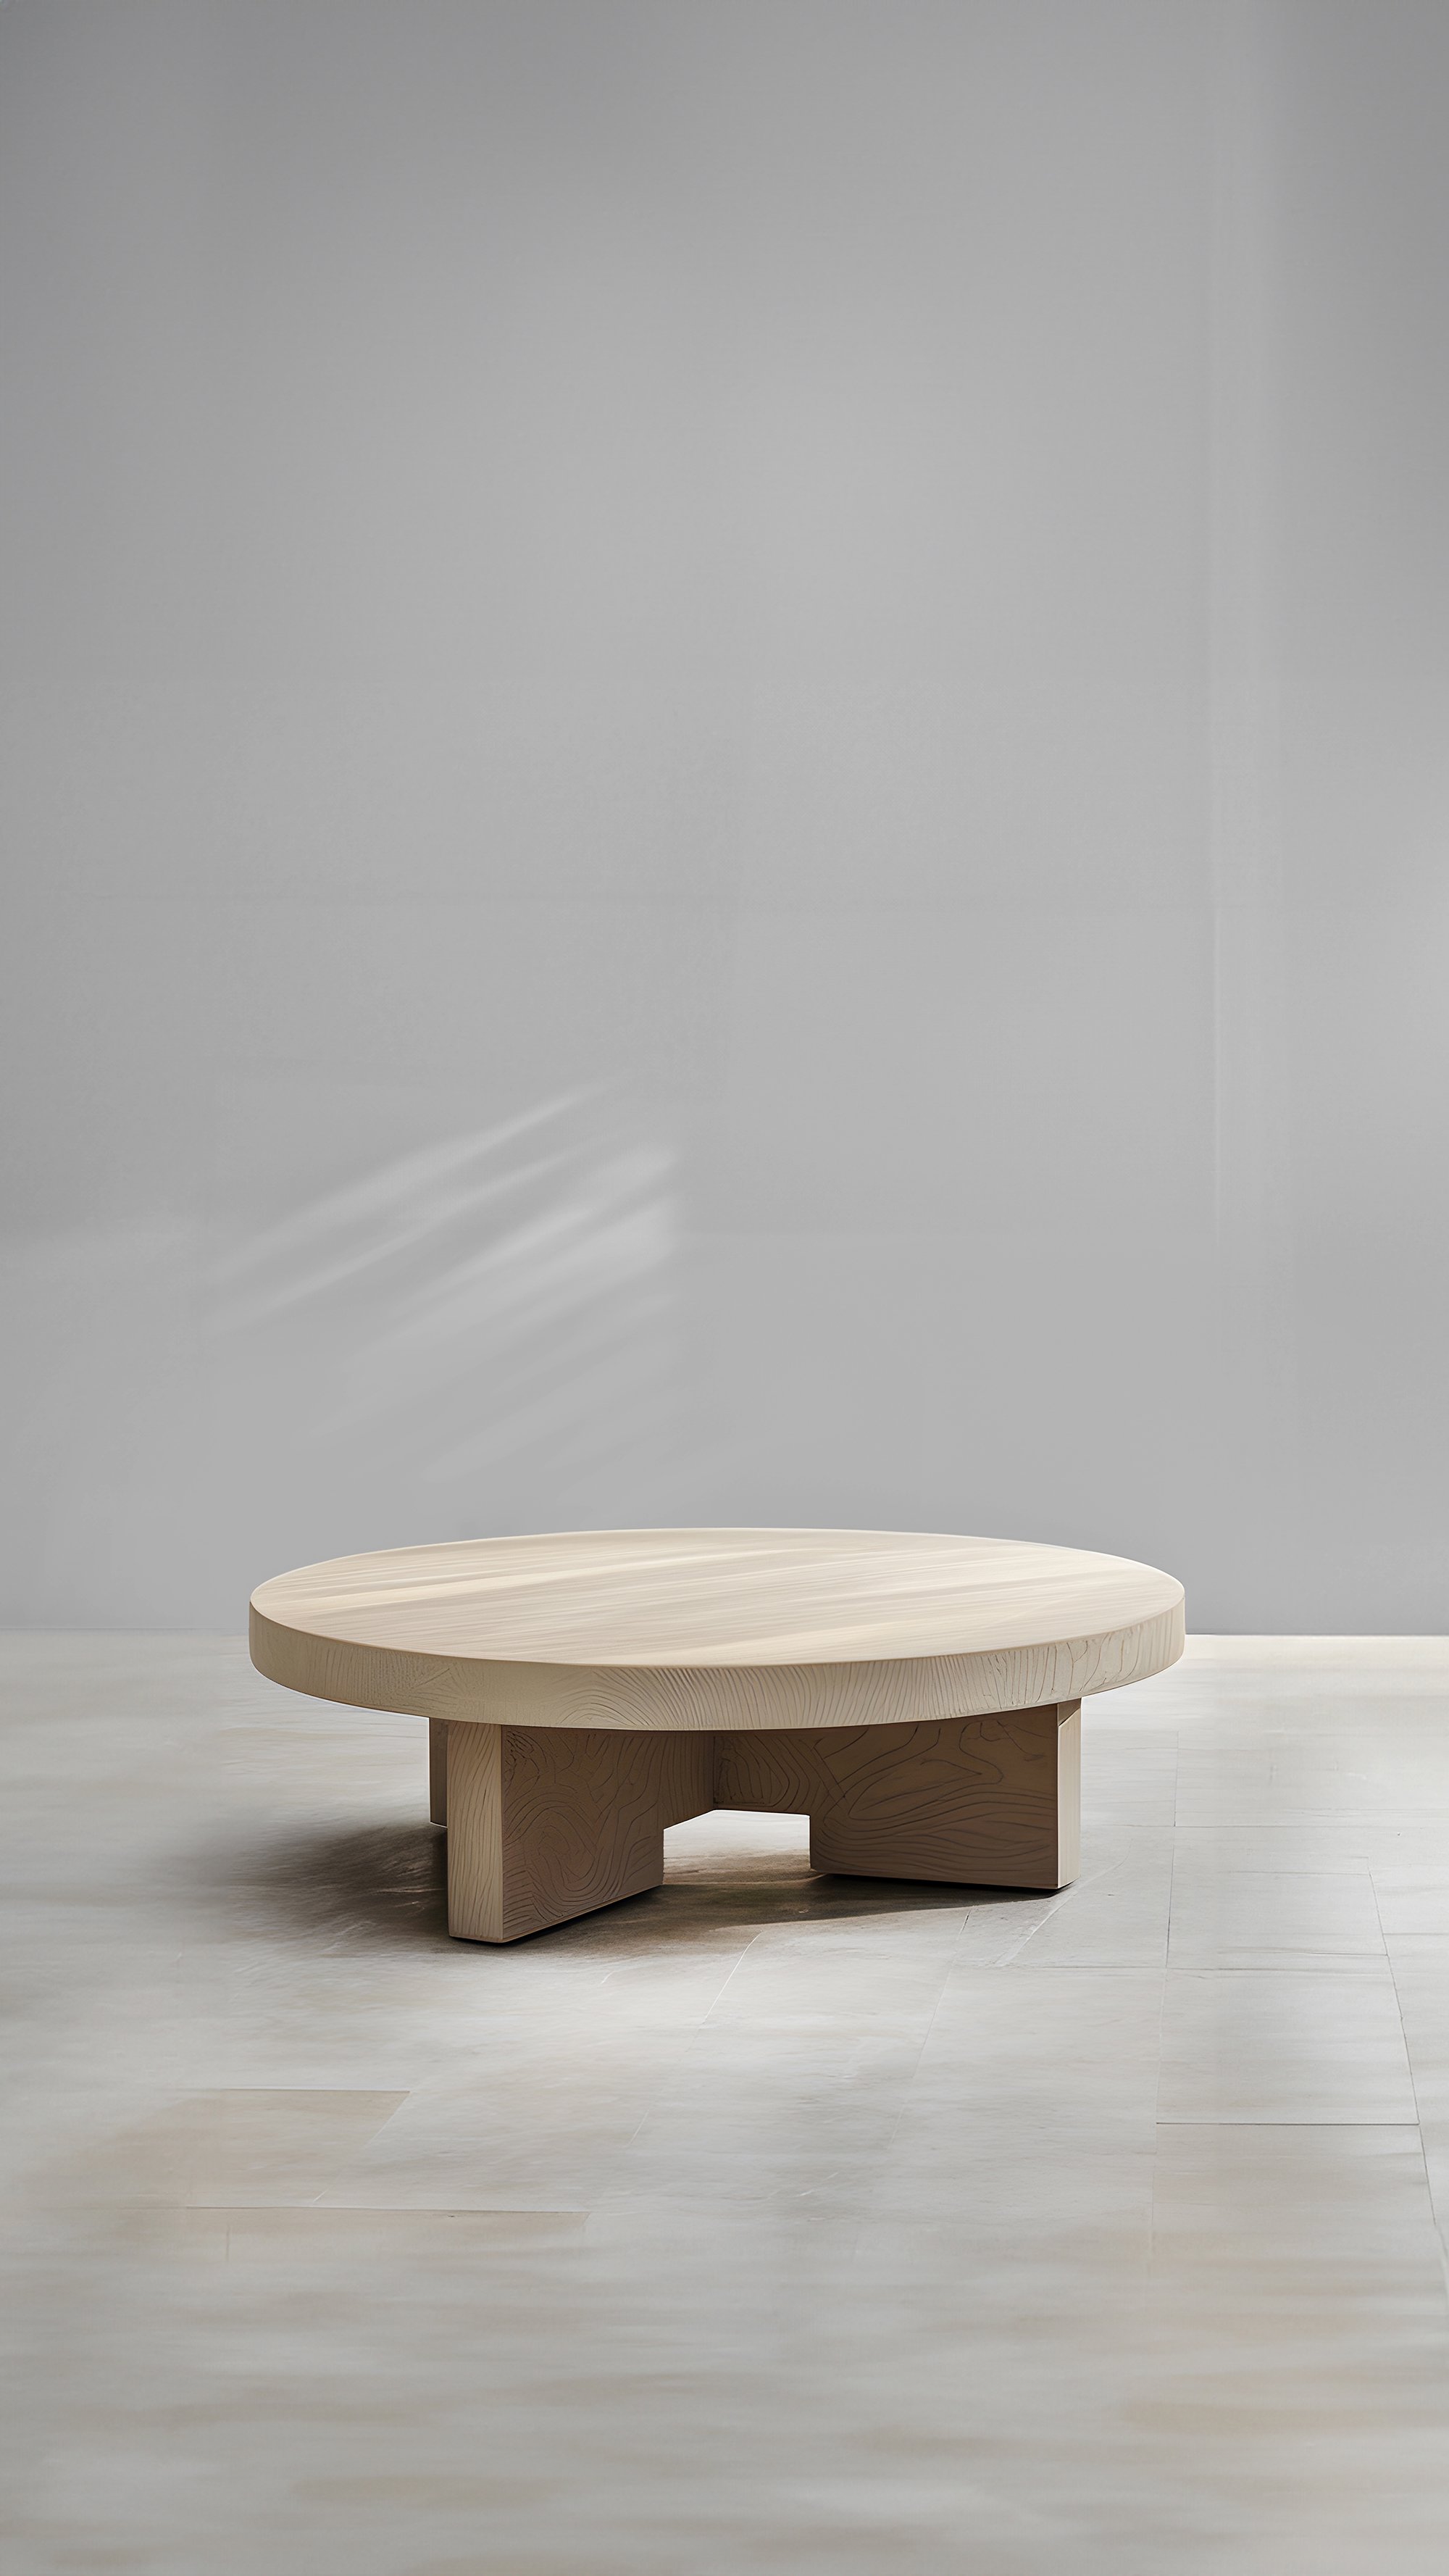 Compact Round Coffee Table in Black Tint - Modern Fundamenta 34 by NONO —6.jpg